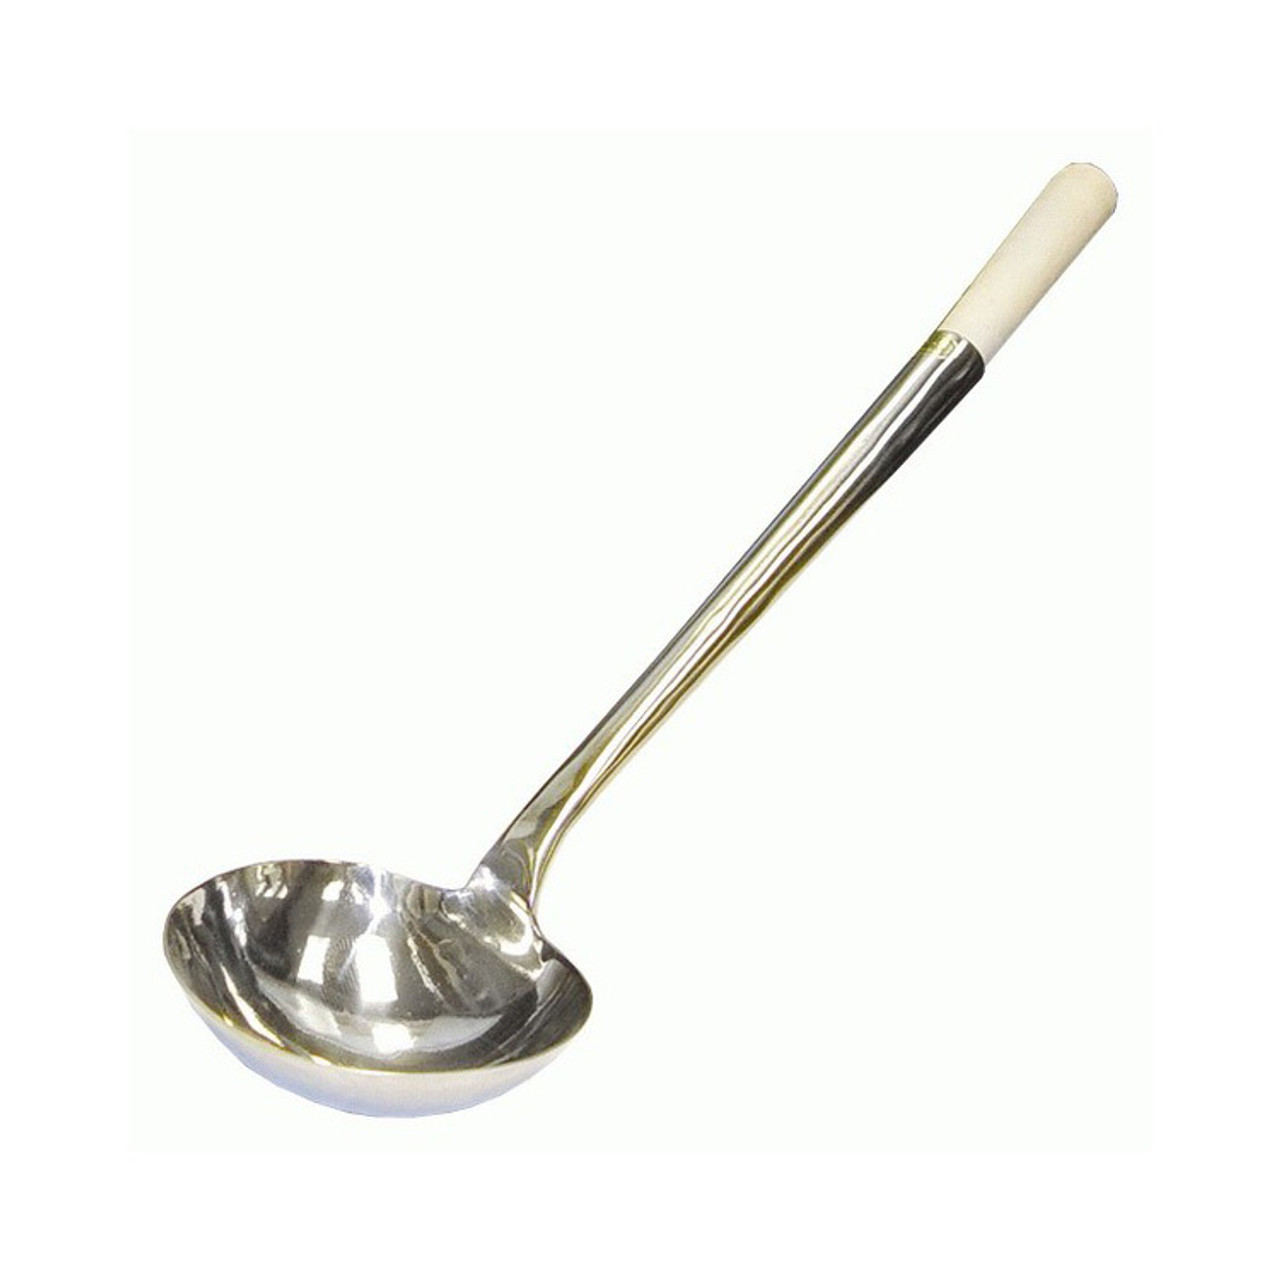 Stainless Steel Chef Cooking Spoon Wok Spoon, Long Handle Soup Spoon  Serving Ladle - Kitchen Tools Wok